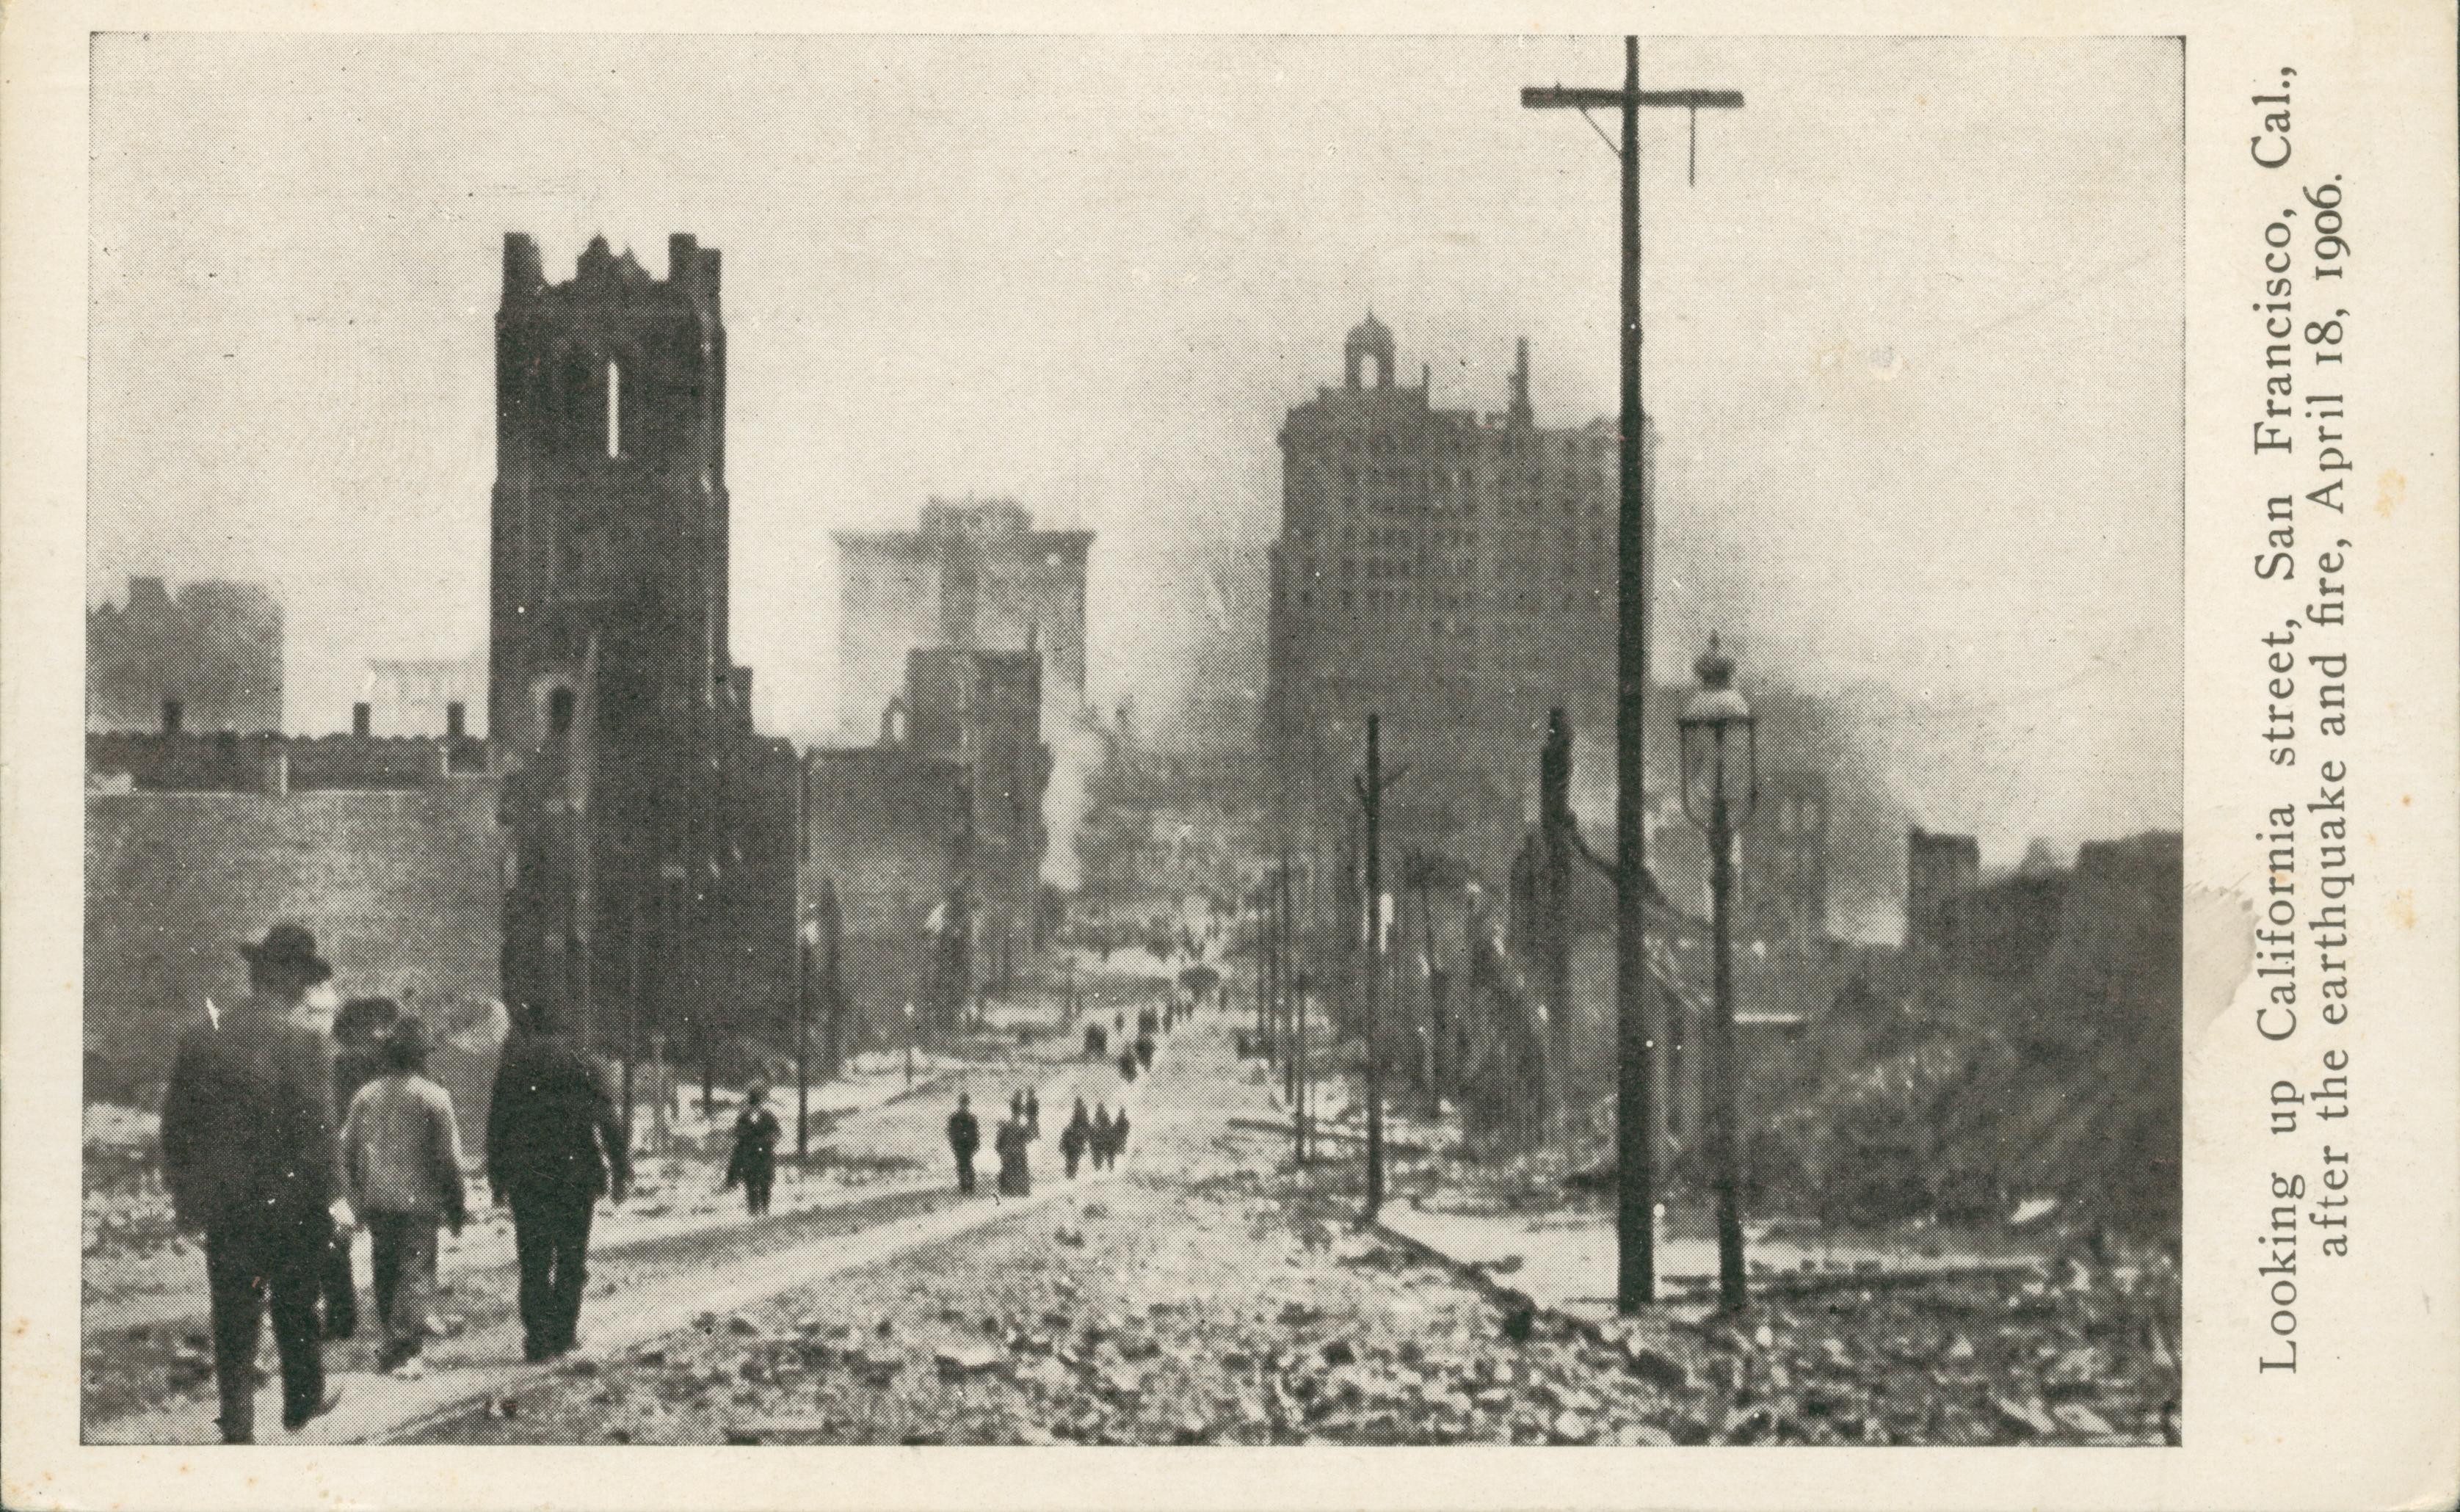 Shows people walking down the street with rubble and destroyed buildings on either side.